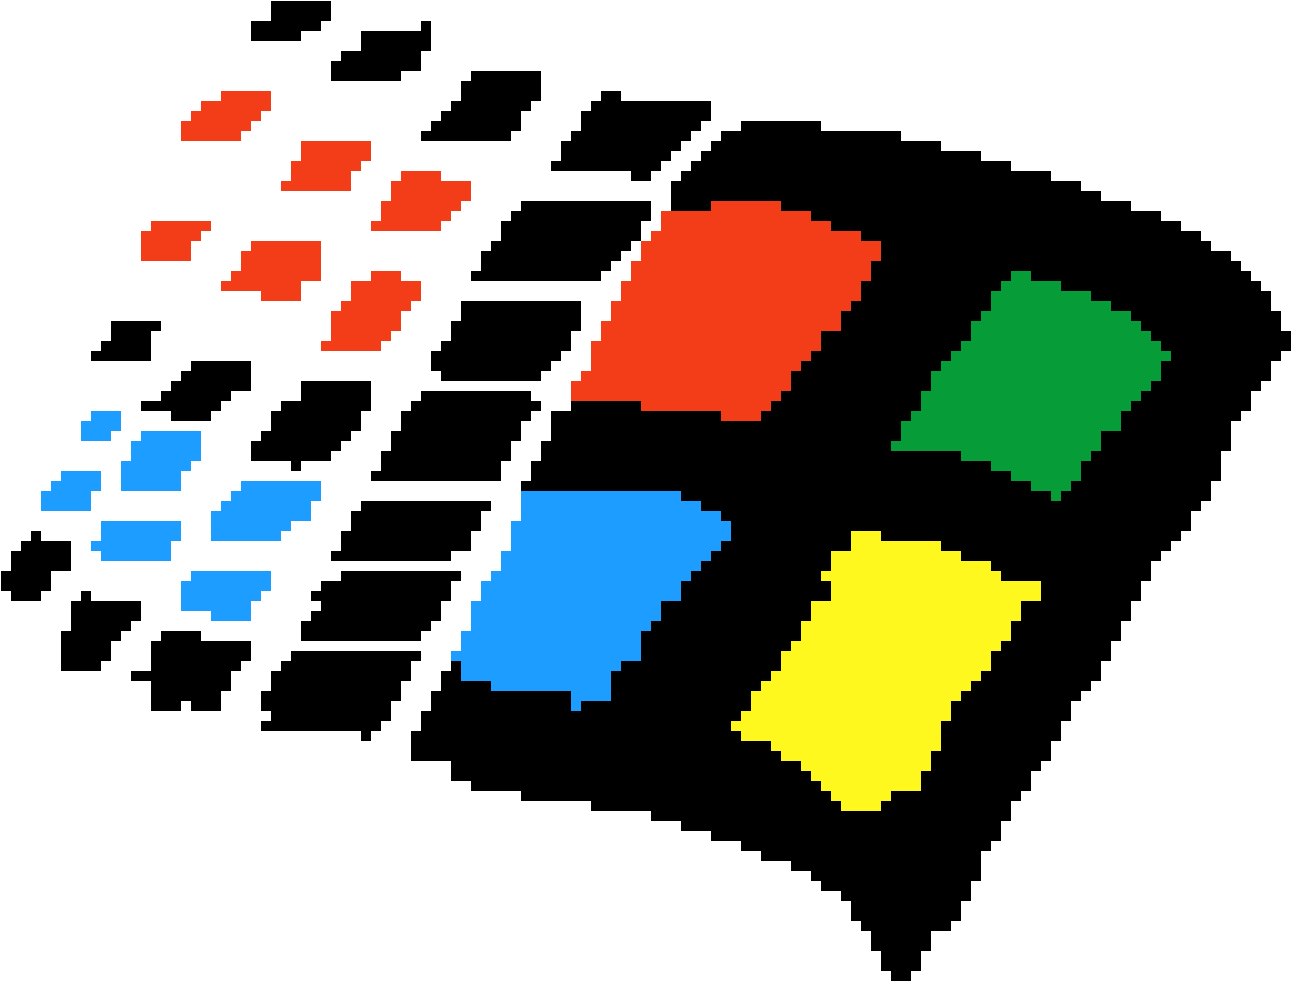 A Group Of Squares With Different Colors